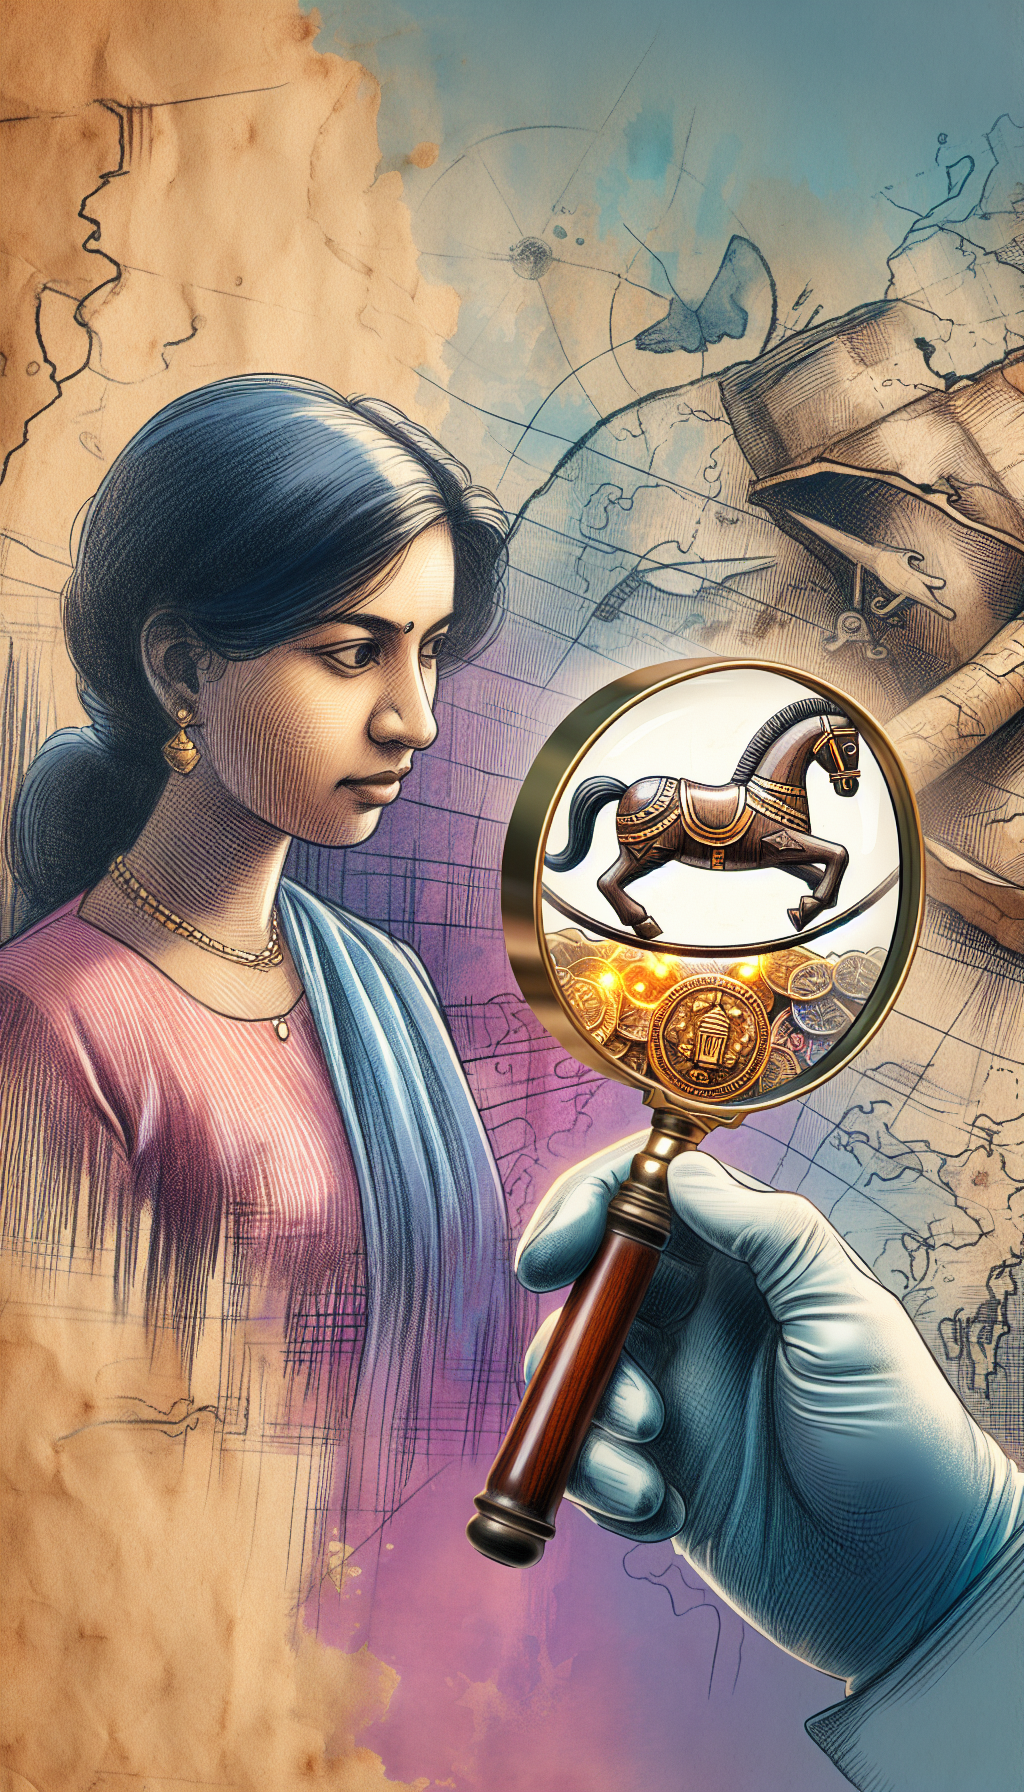 An antique inspector peers through a magnifying glass, revealing glowing hallmarks on a miniature, intricately carved old wooden rocking horse perched on top of an aged treasure map. The background swirls from sketched pencil lines to vibrant watercolor shades, symbolizing the journey from uncertainty to the discovery of the rocking horse's authentic, valuable past.